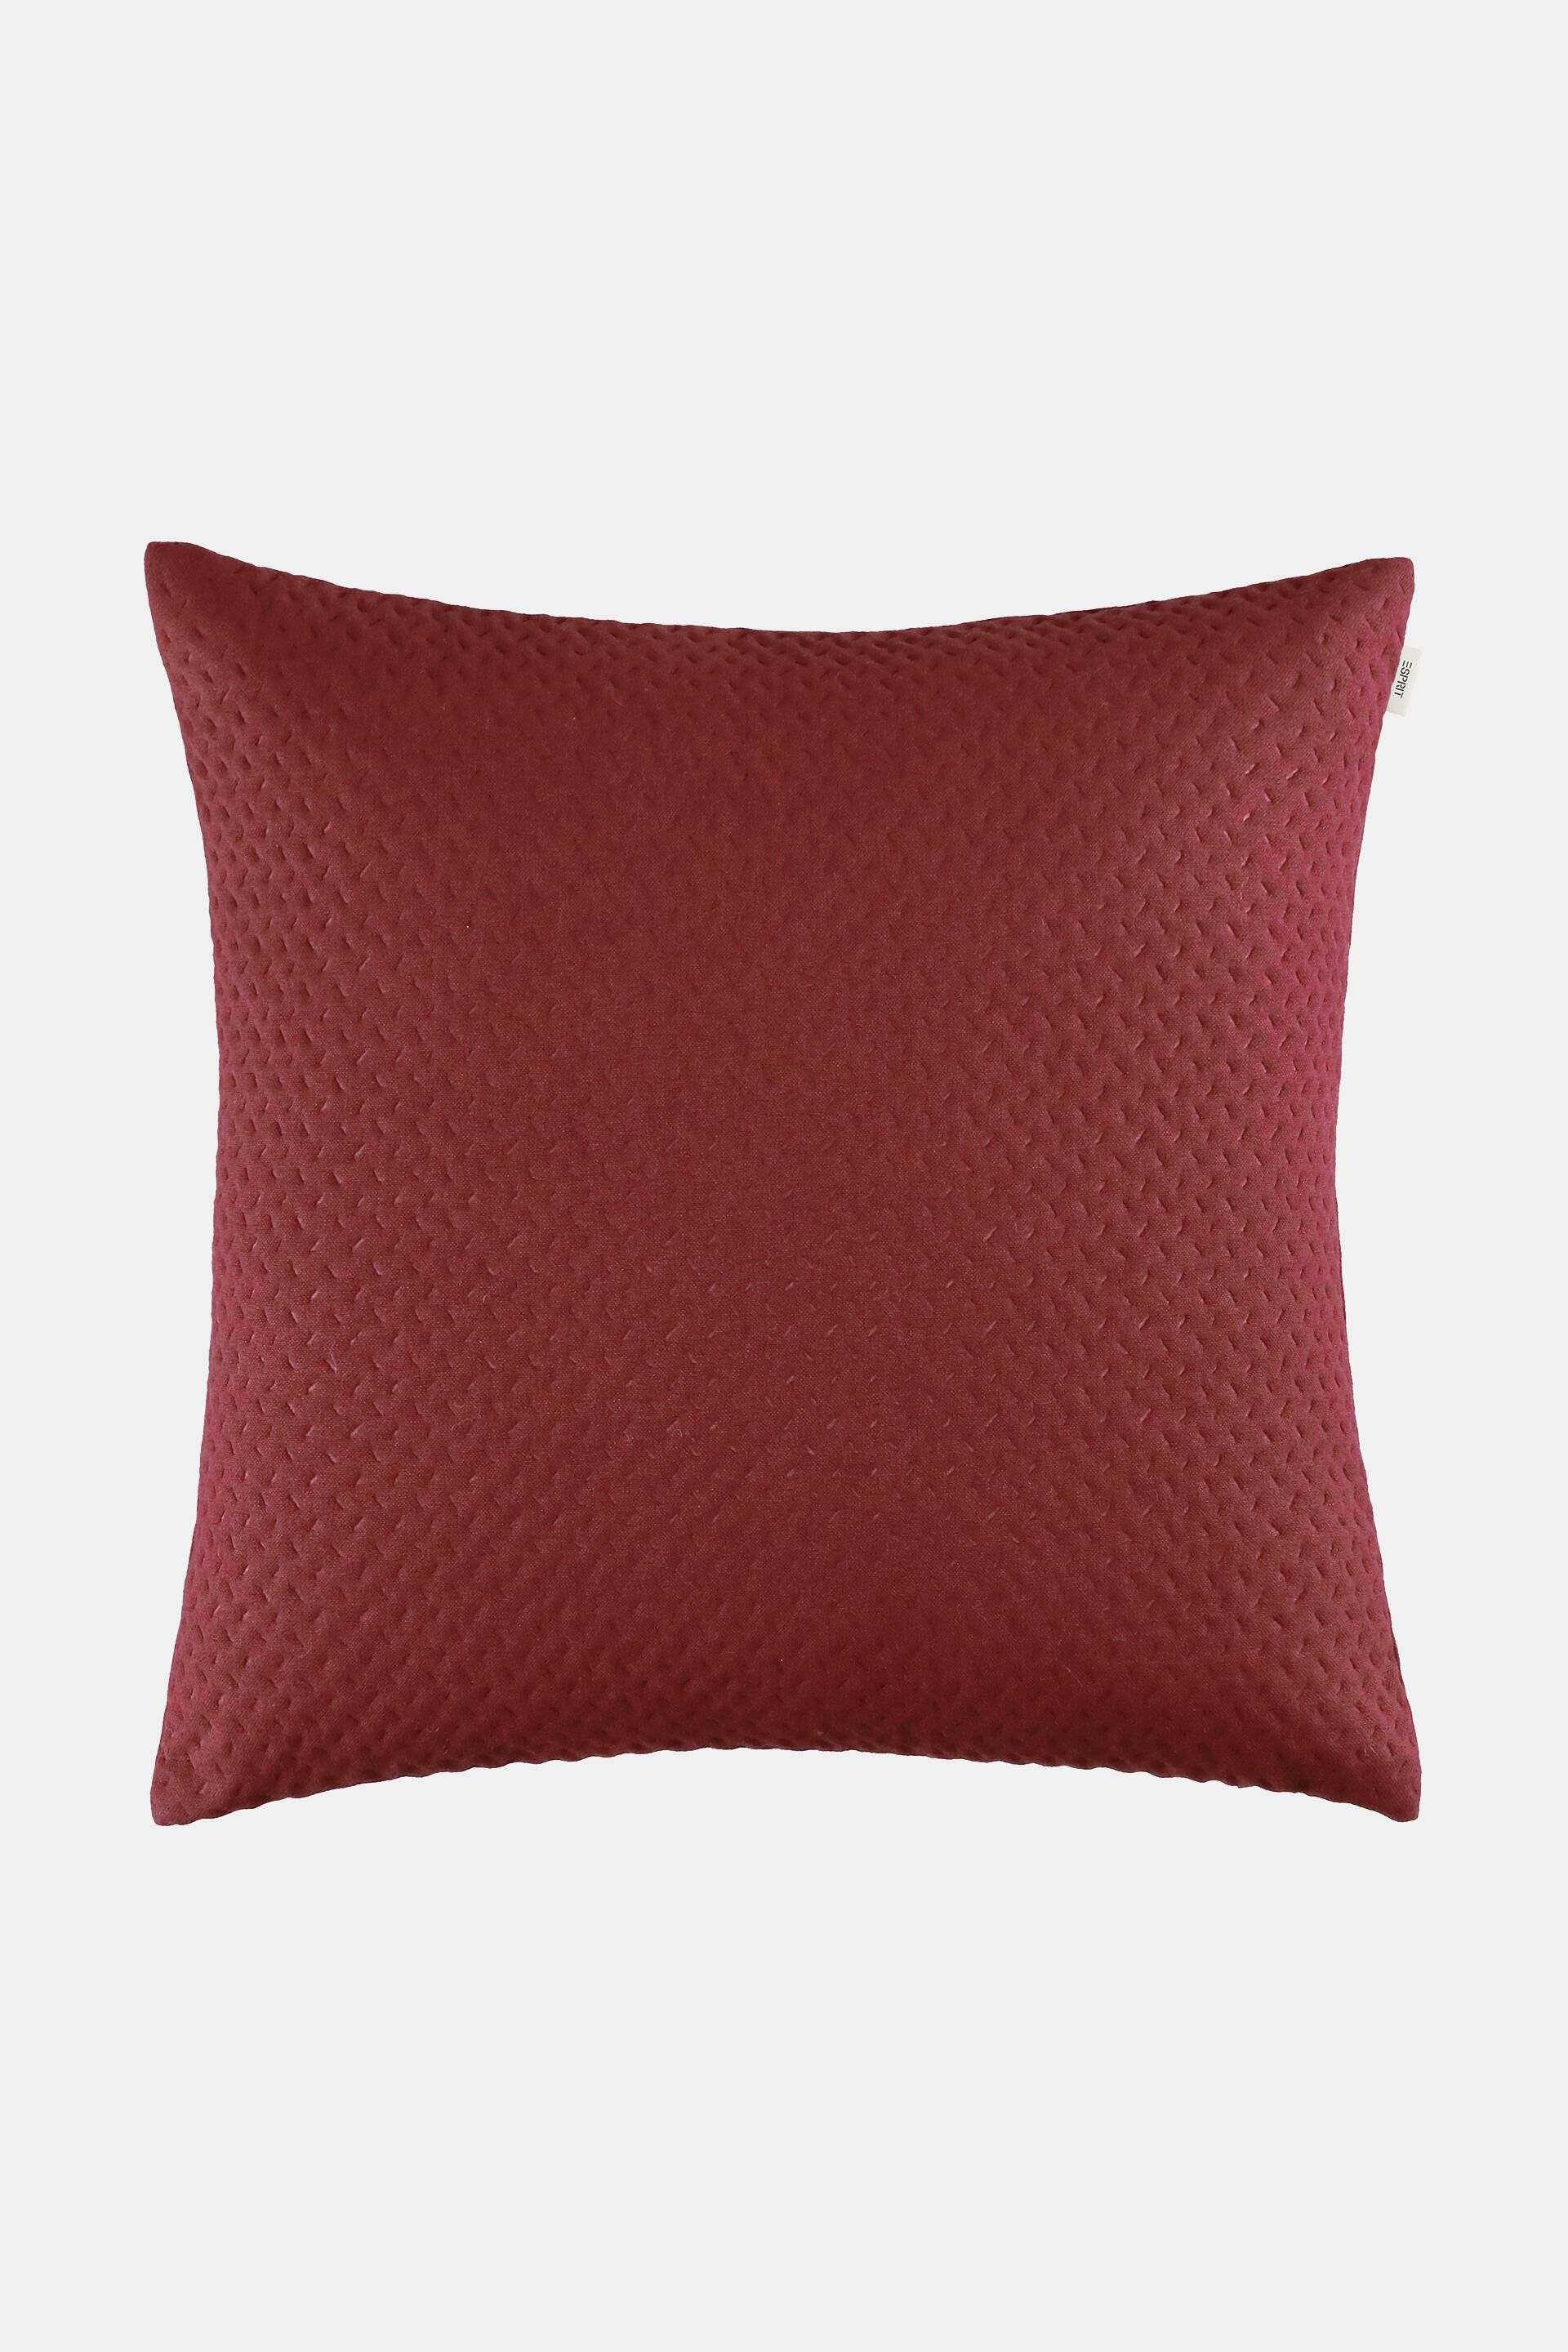 Esprit cover Large, woven lounge cushion